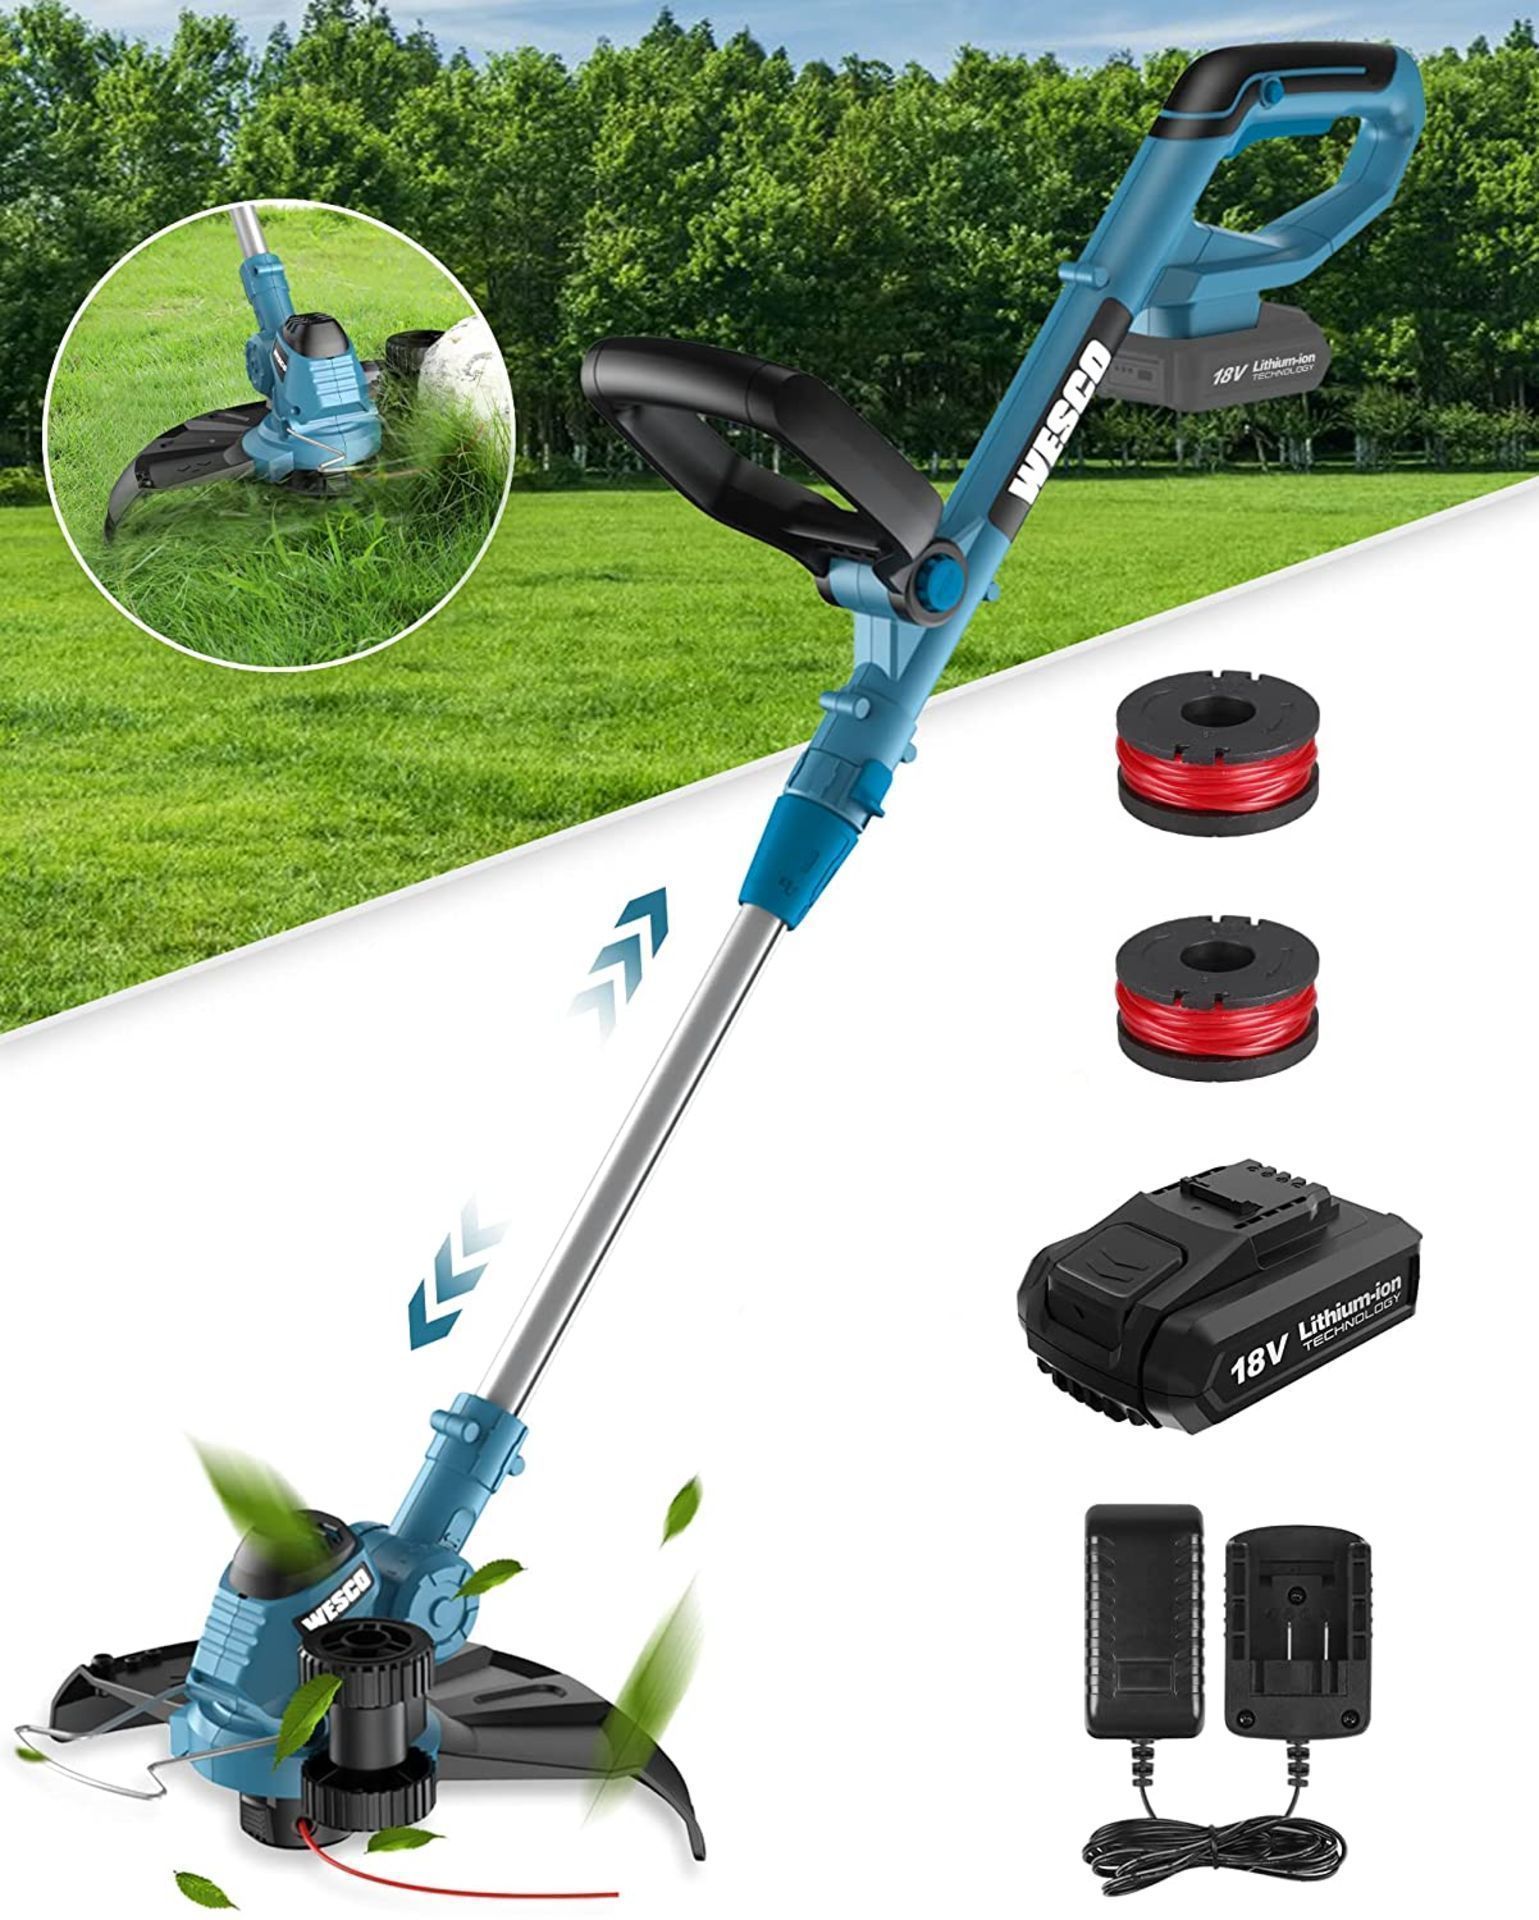 TRADE LOT 8 X New Boxed WESCO Cordless 2 in 1 Electric String Trimmer/Edger 18V with 2.0Ah